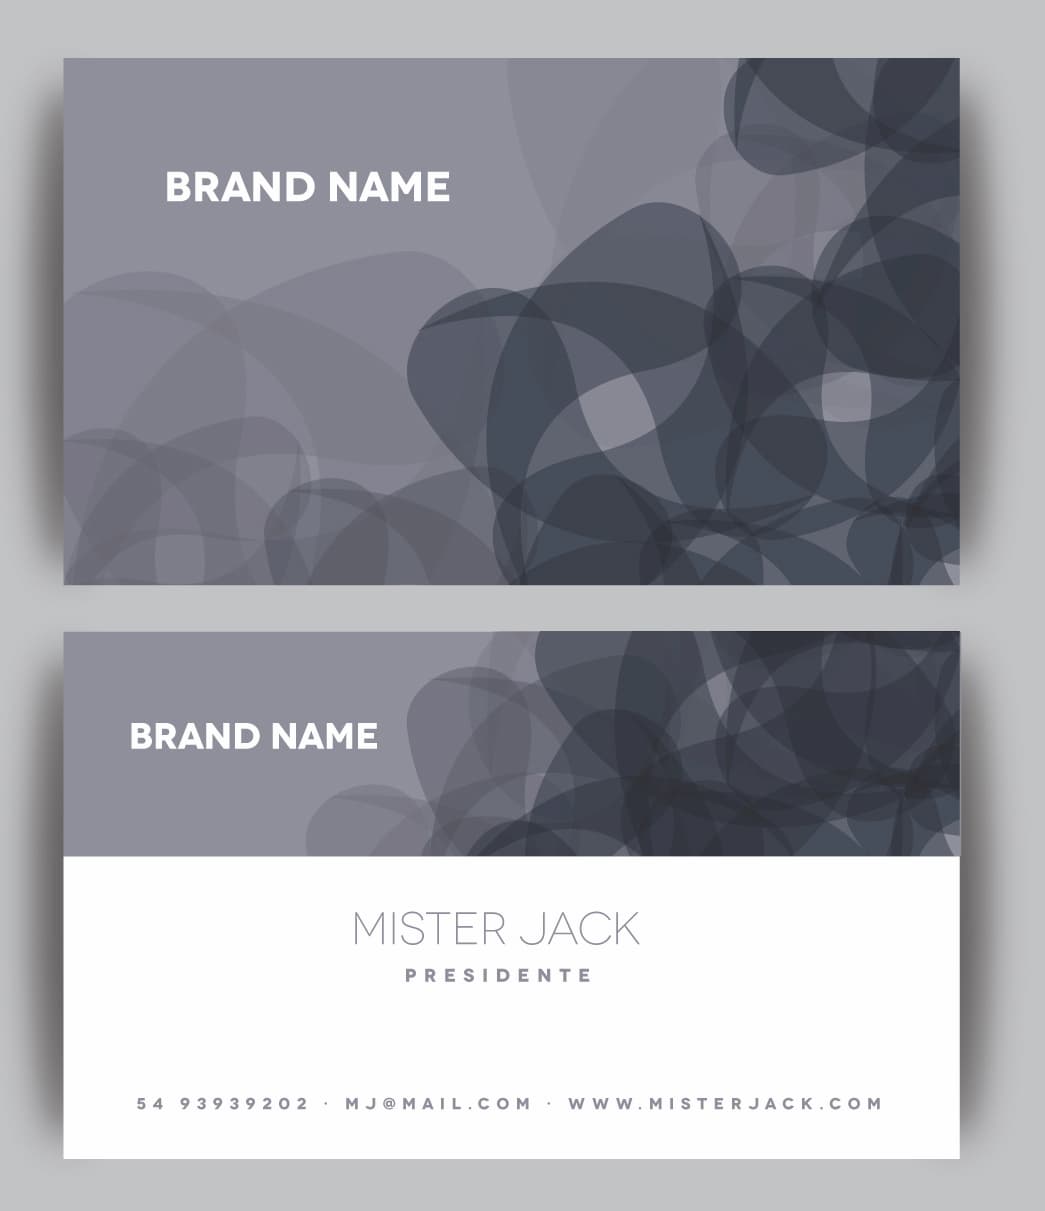 Image of business cards